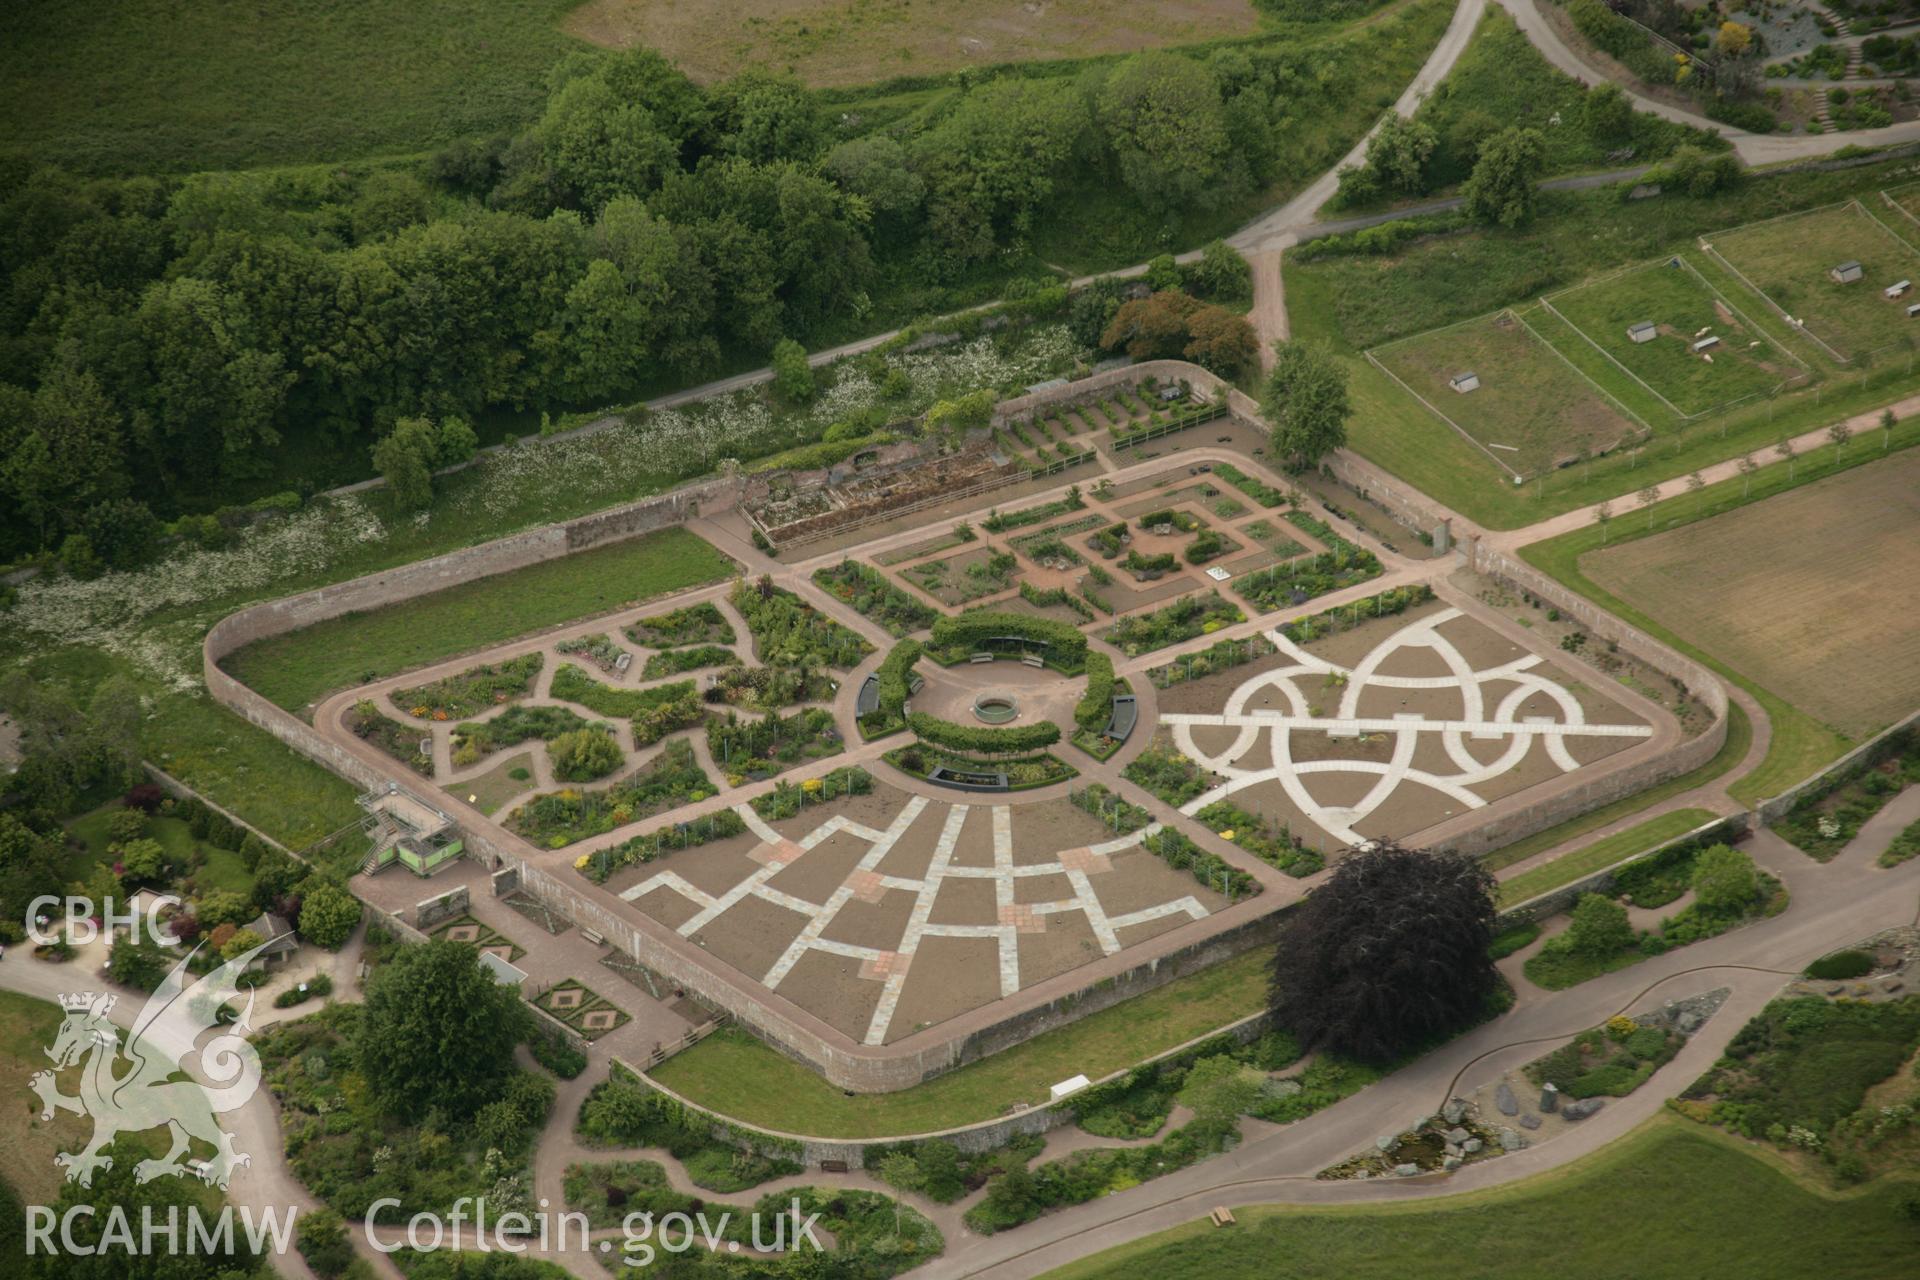 RCAHMW colour oblique aerial photograph of Middleton Hall Park, now the National Botanic Garden of Wales, showing walled garden from the south. Taken on 09 June 2005 by Toby Driver